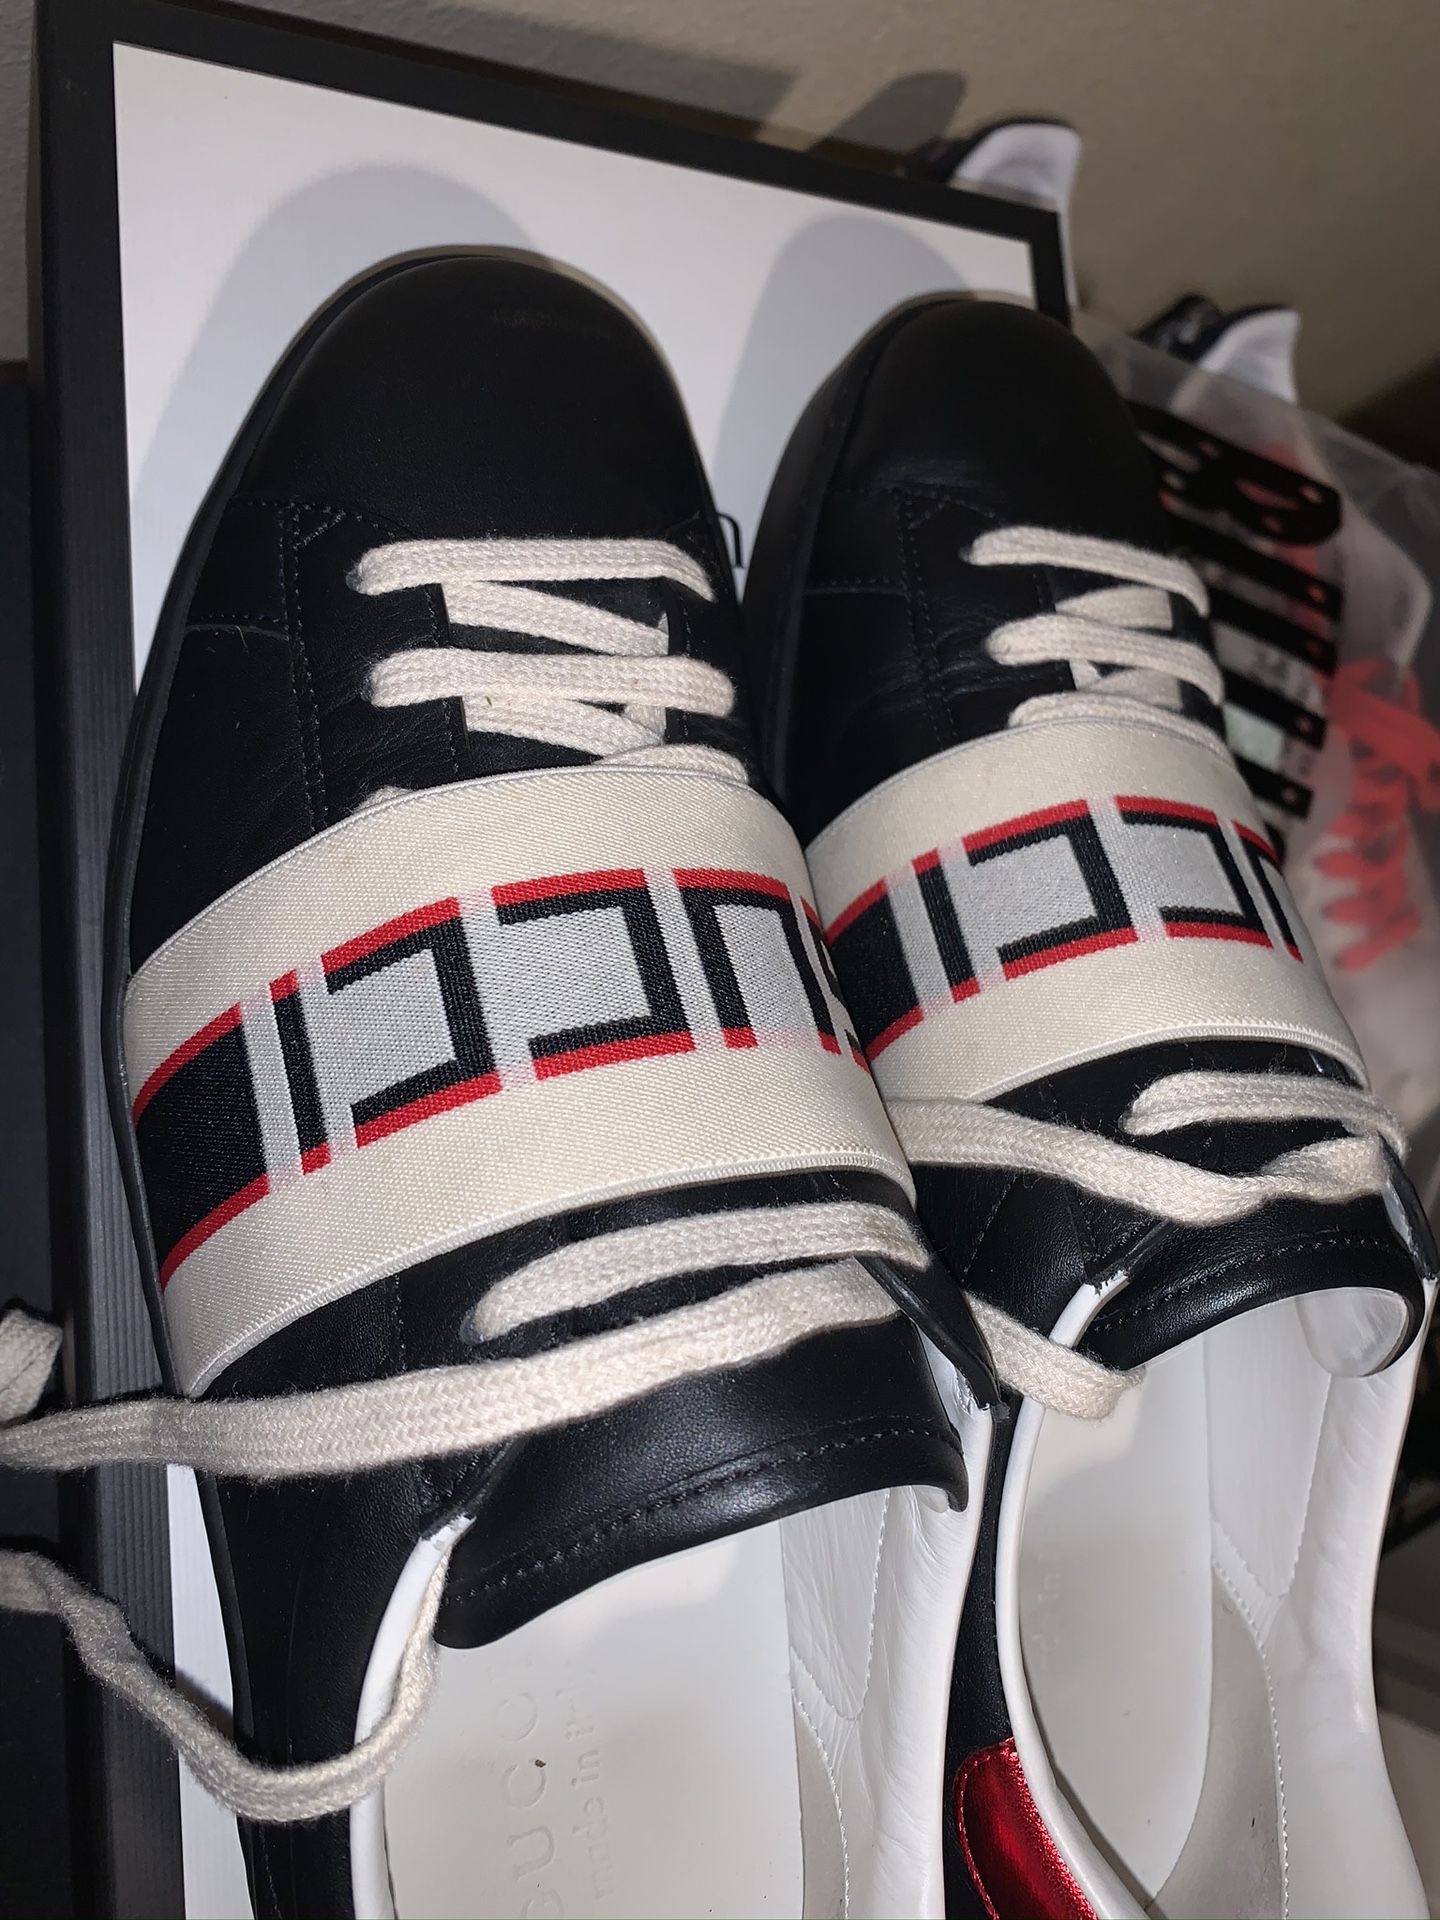 Gucci sneakers size 9.5